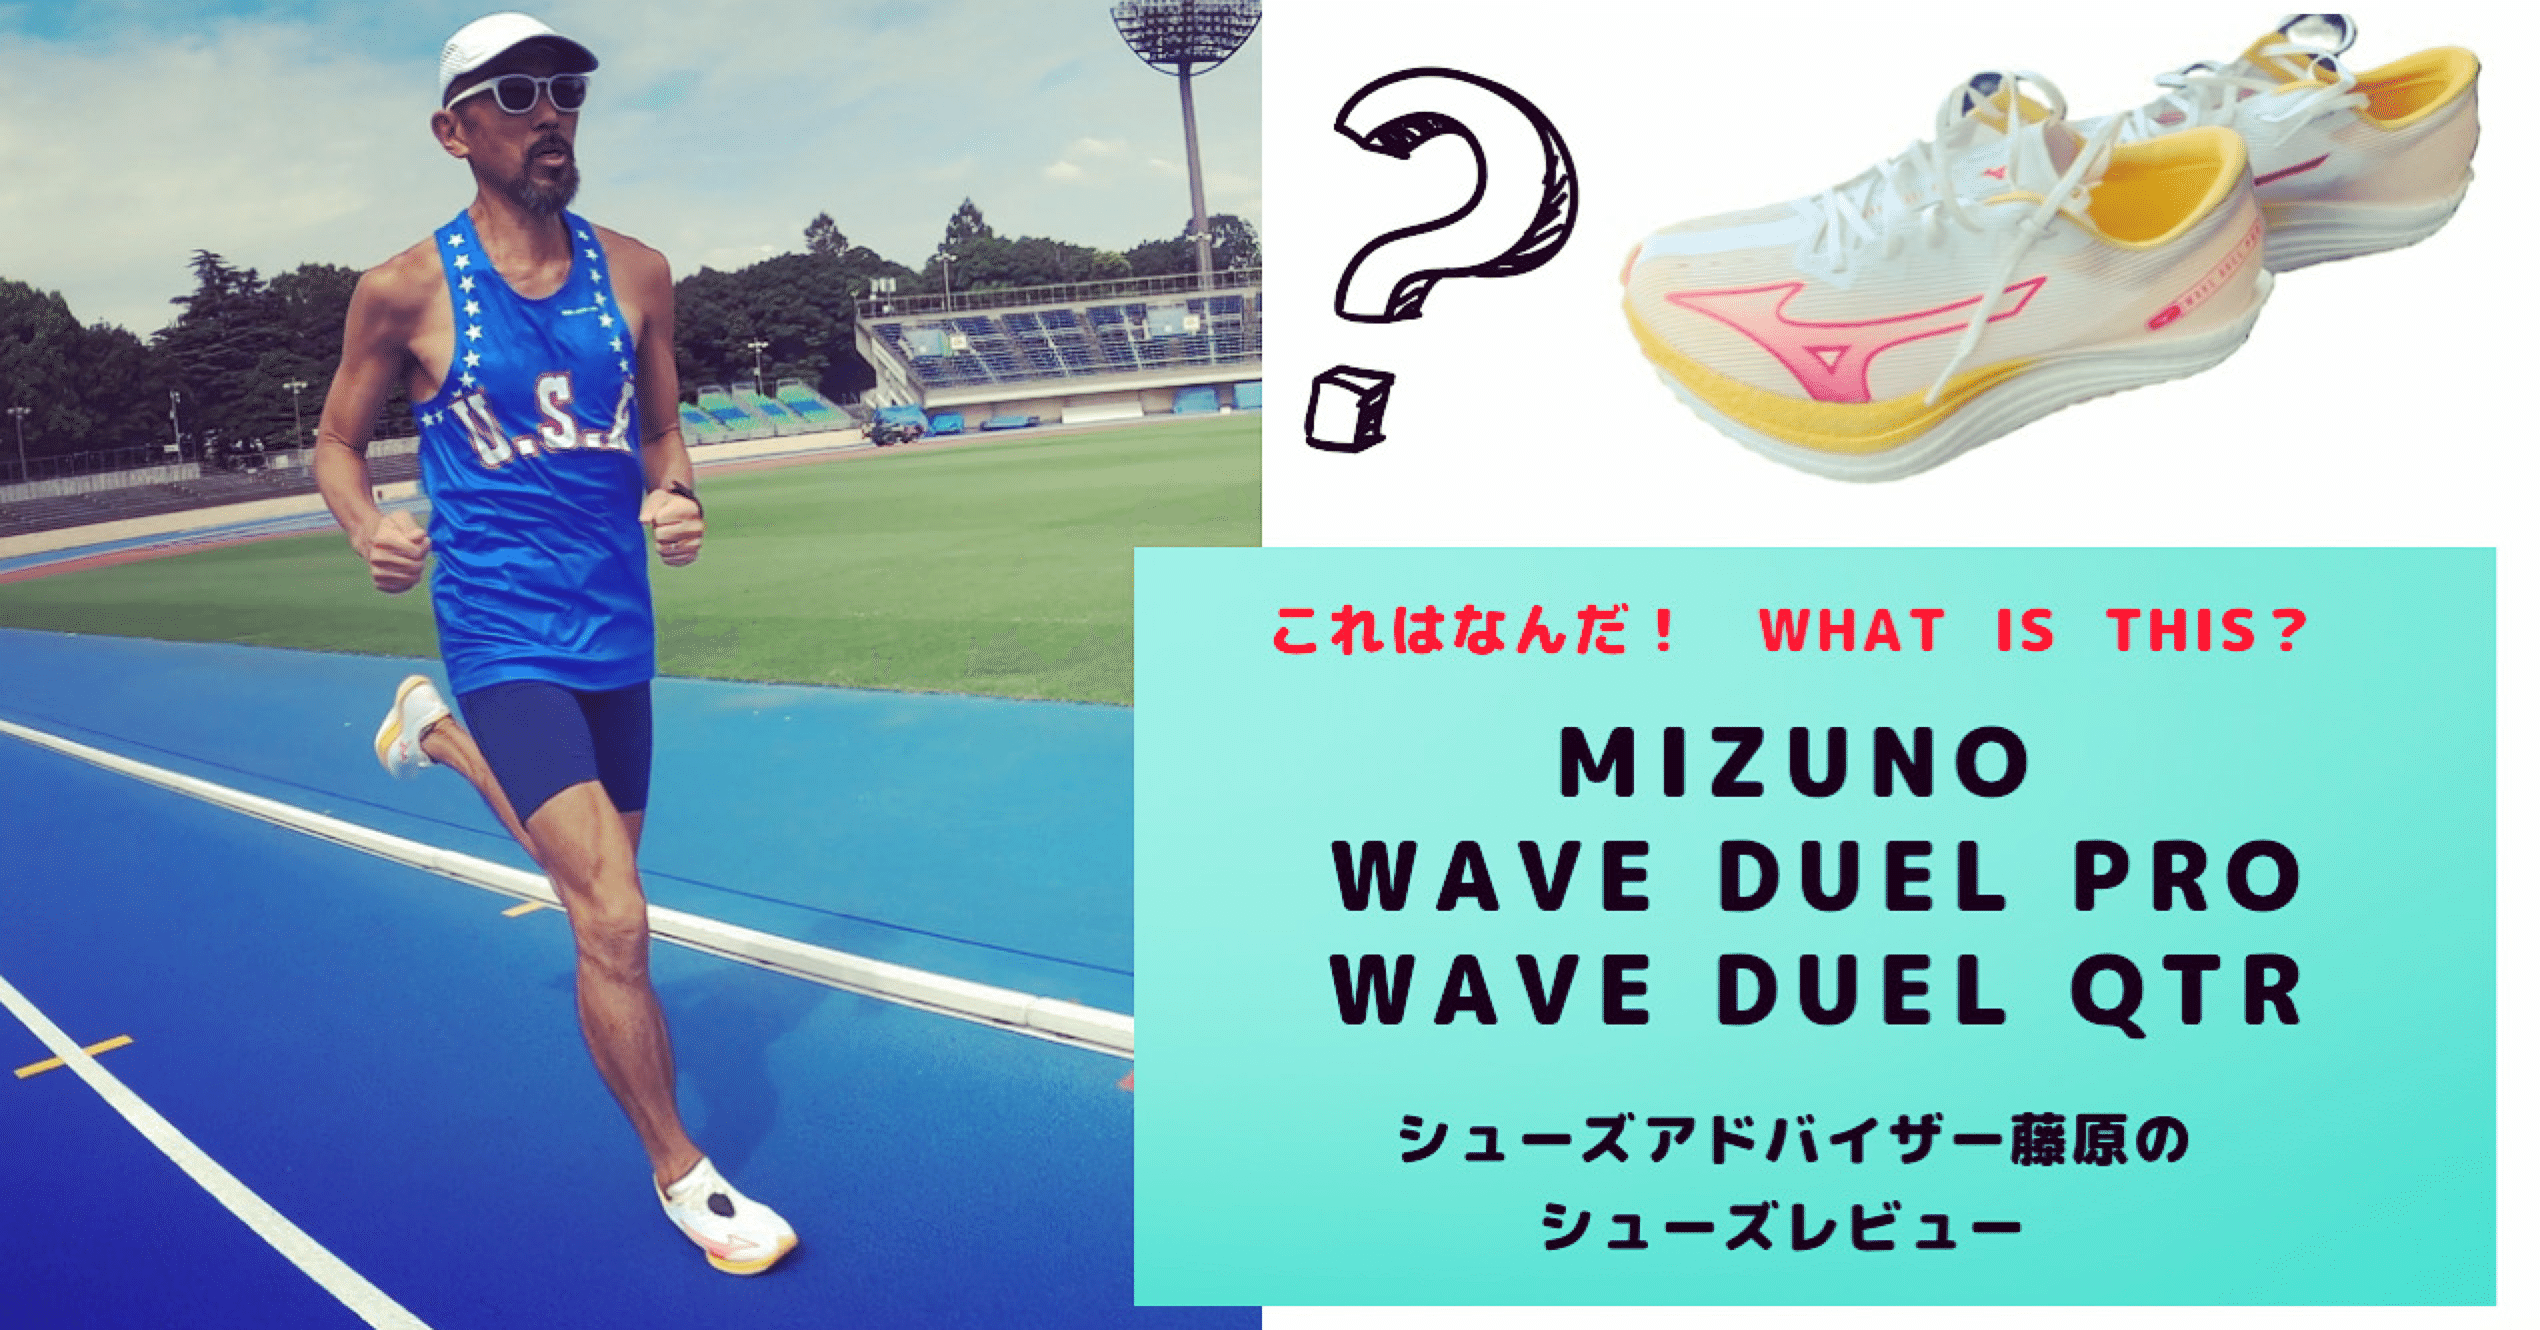 MIZUNO WAVE DUEL PRO & QTRこれは一体なんだ？ What is this?｜F